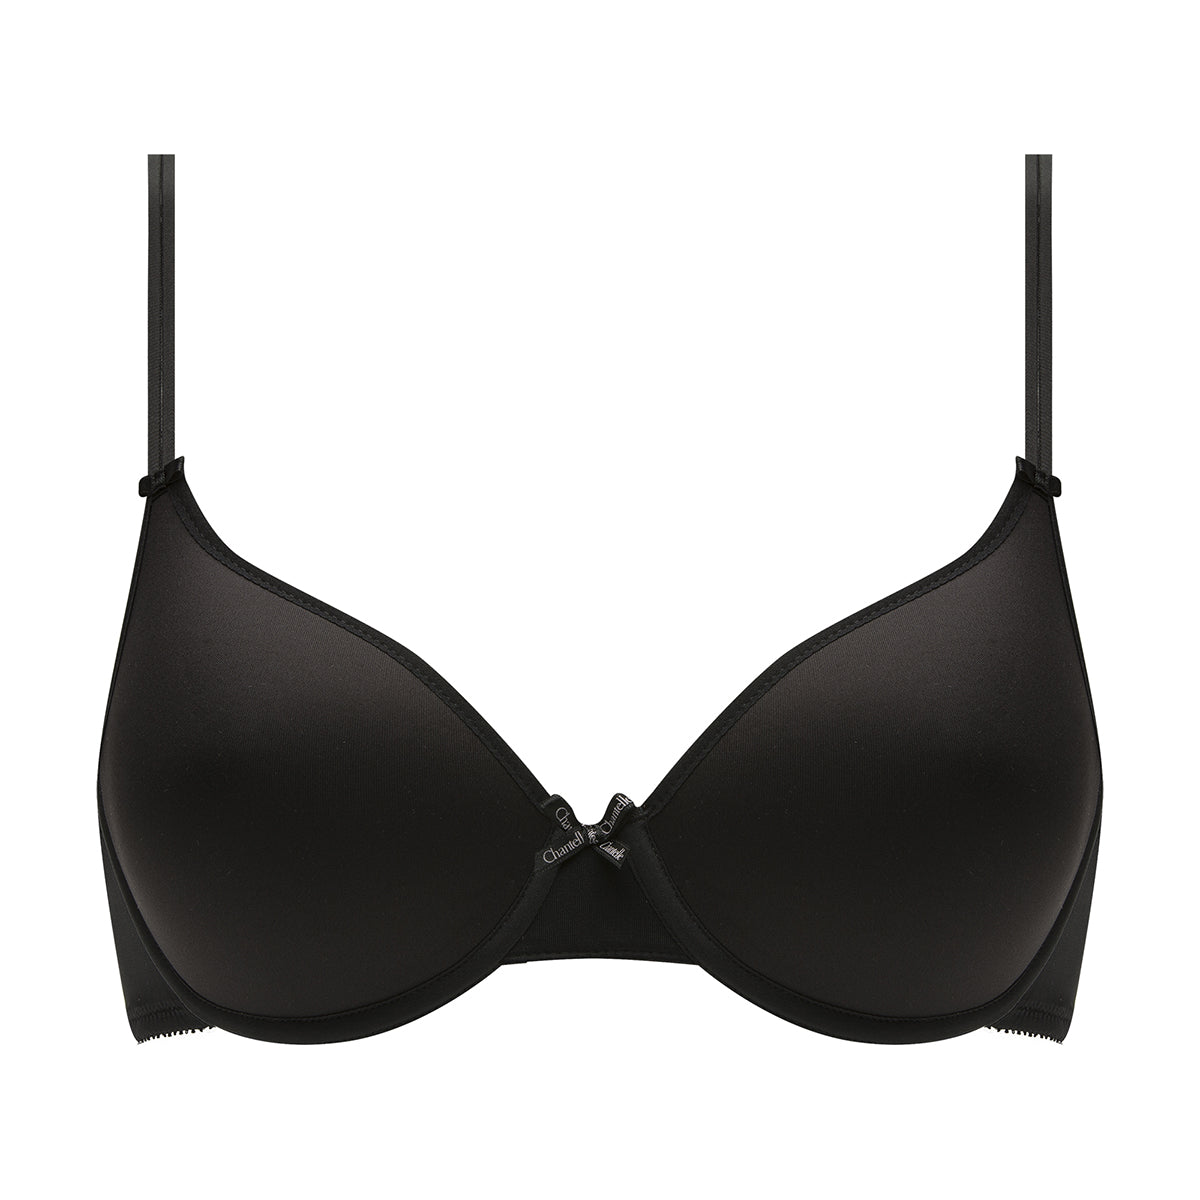 Basic finds France- Ukraine Women's Padded Sports Bra XS, Black : Basic  finds: : Clothing, Shoes & Accessories